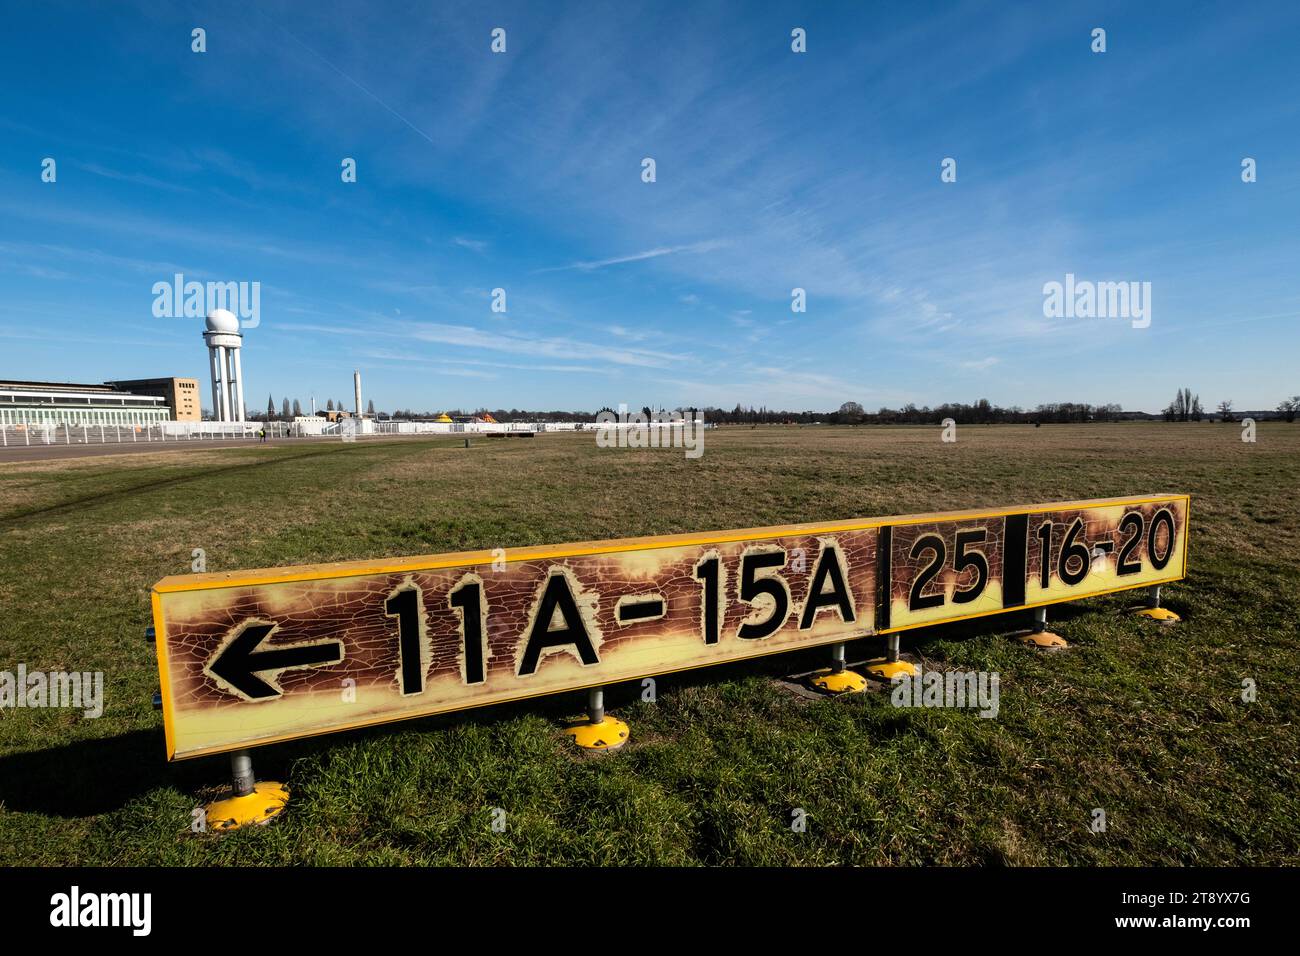 Old and deteriorating airfield signage at the disused Berlin Tempelhof airport in Berlin, Germany Stock Photo